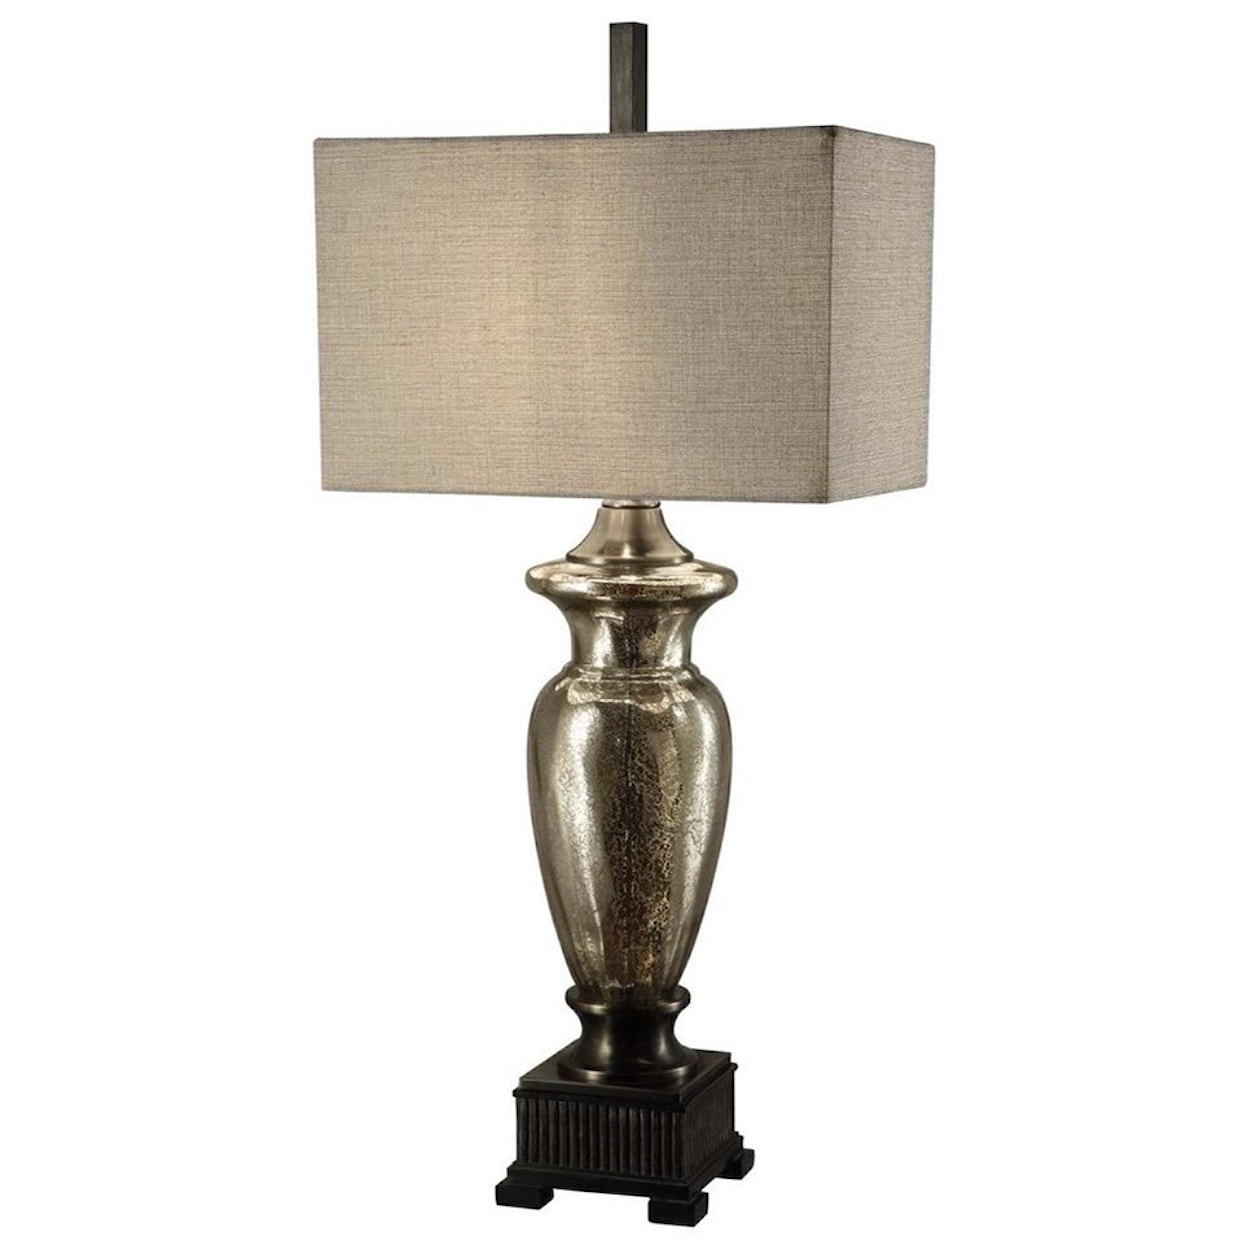 Crestview Collection Lighting Antique Murcury Glass Table Lamp